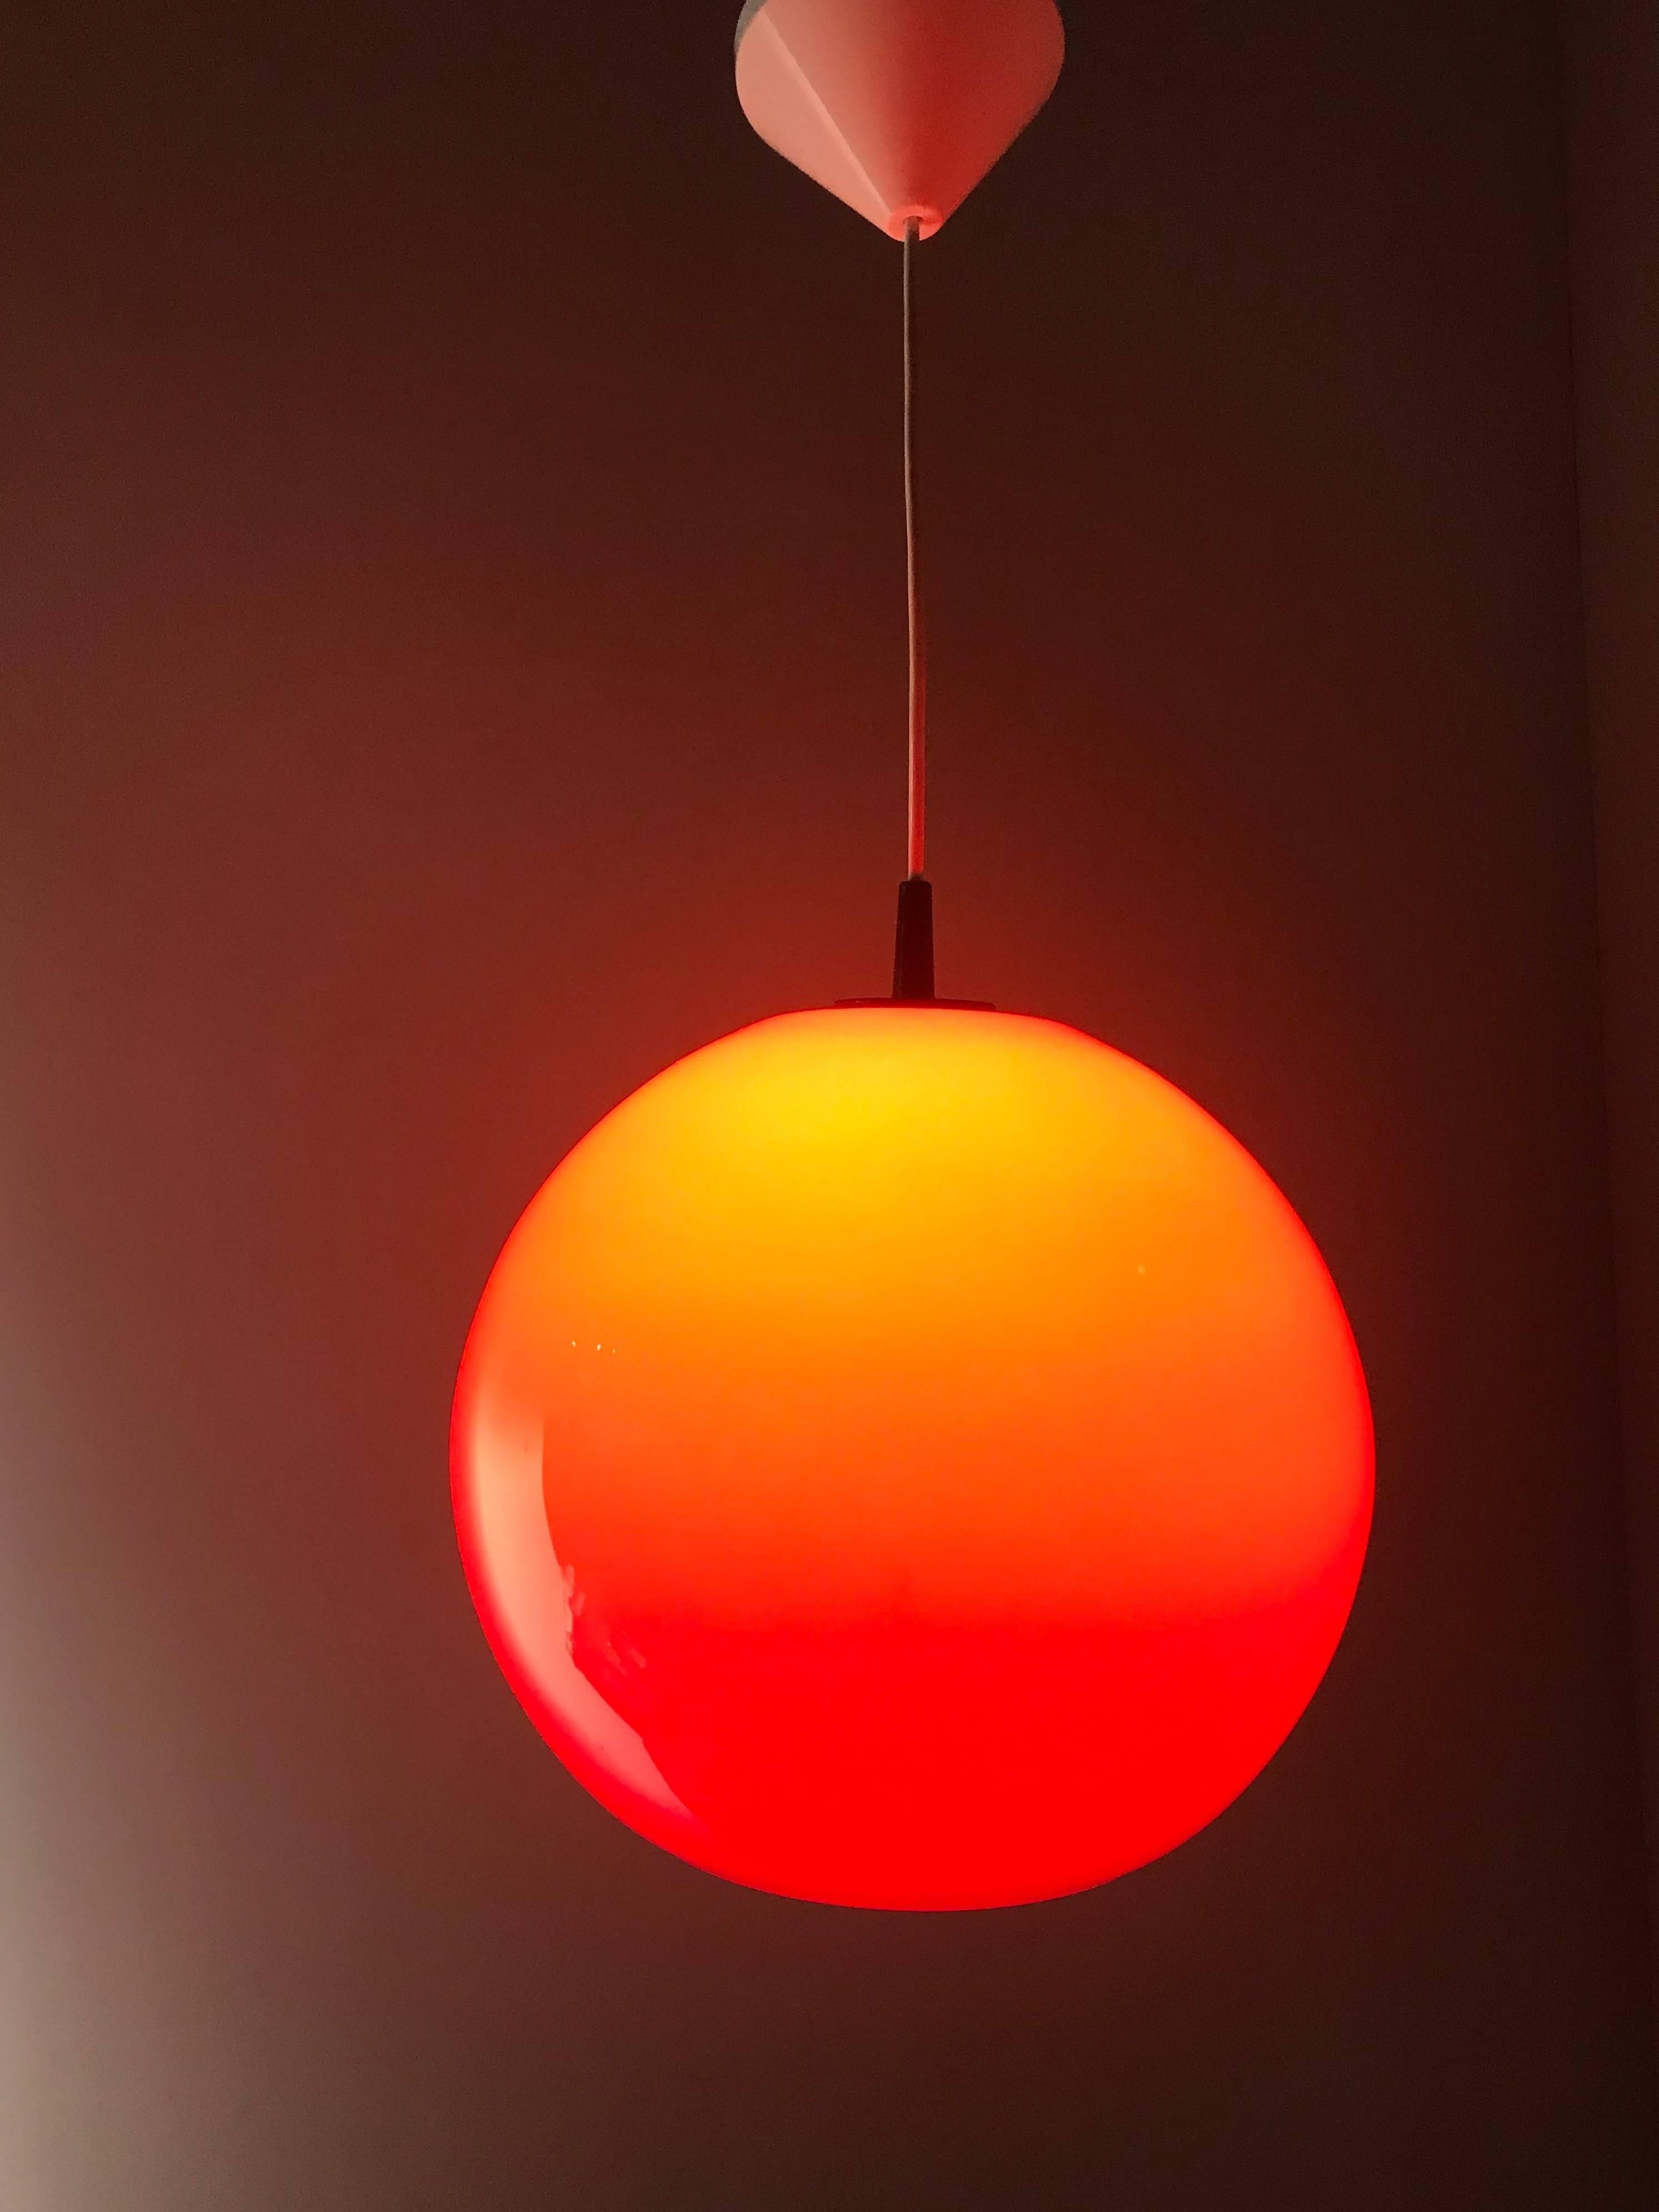 Mid-Century Modern, stunning red light fixture.

For the connoisseurs and collectors of vintage lighting we also have this beautifully designed and executed, red glass pendant. This striking red pendant is a real eye catcher and it will look perfect